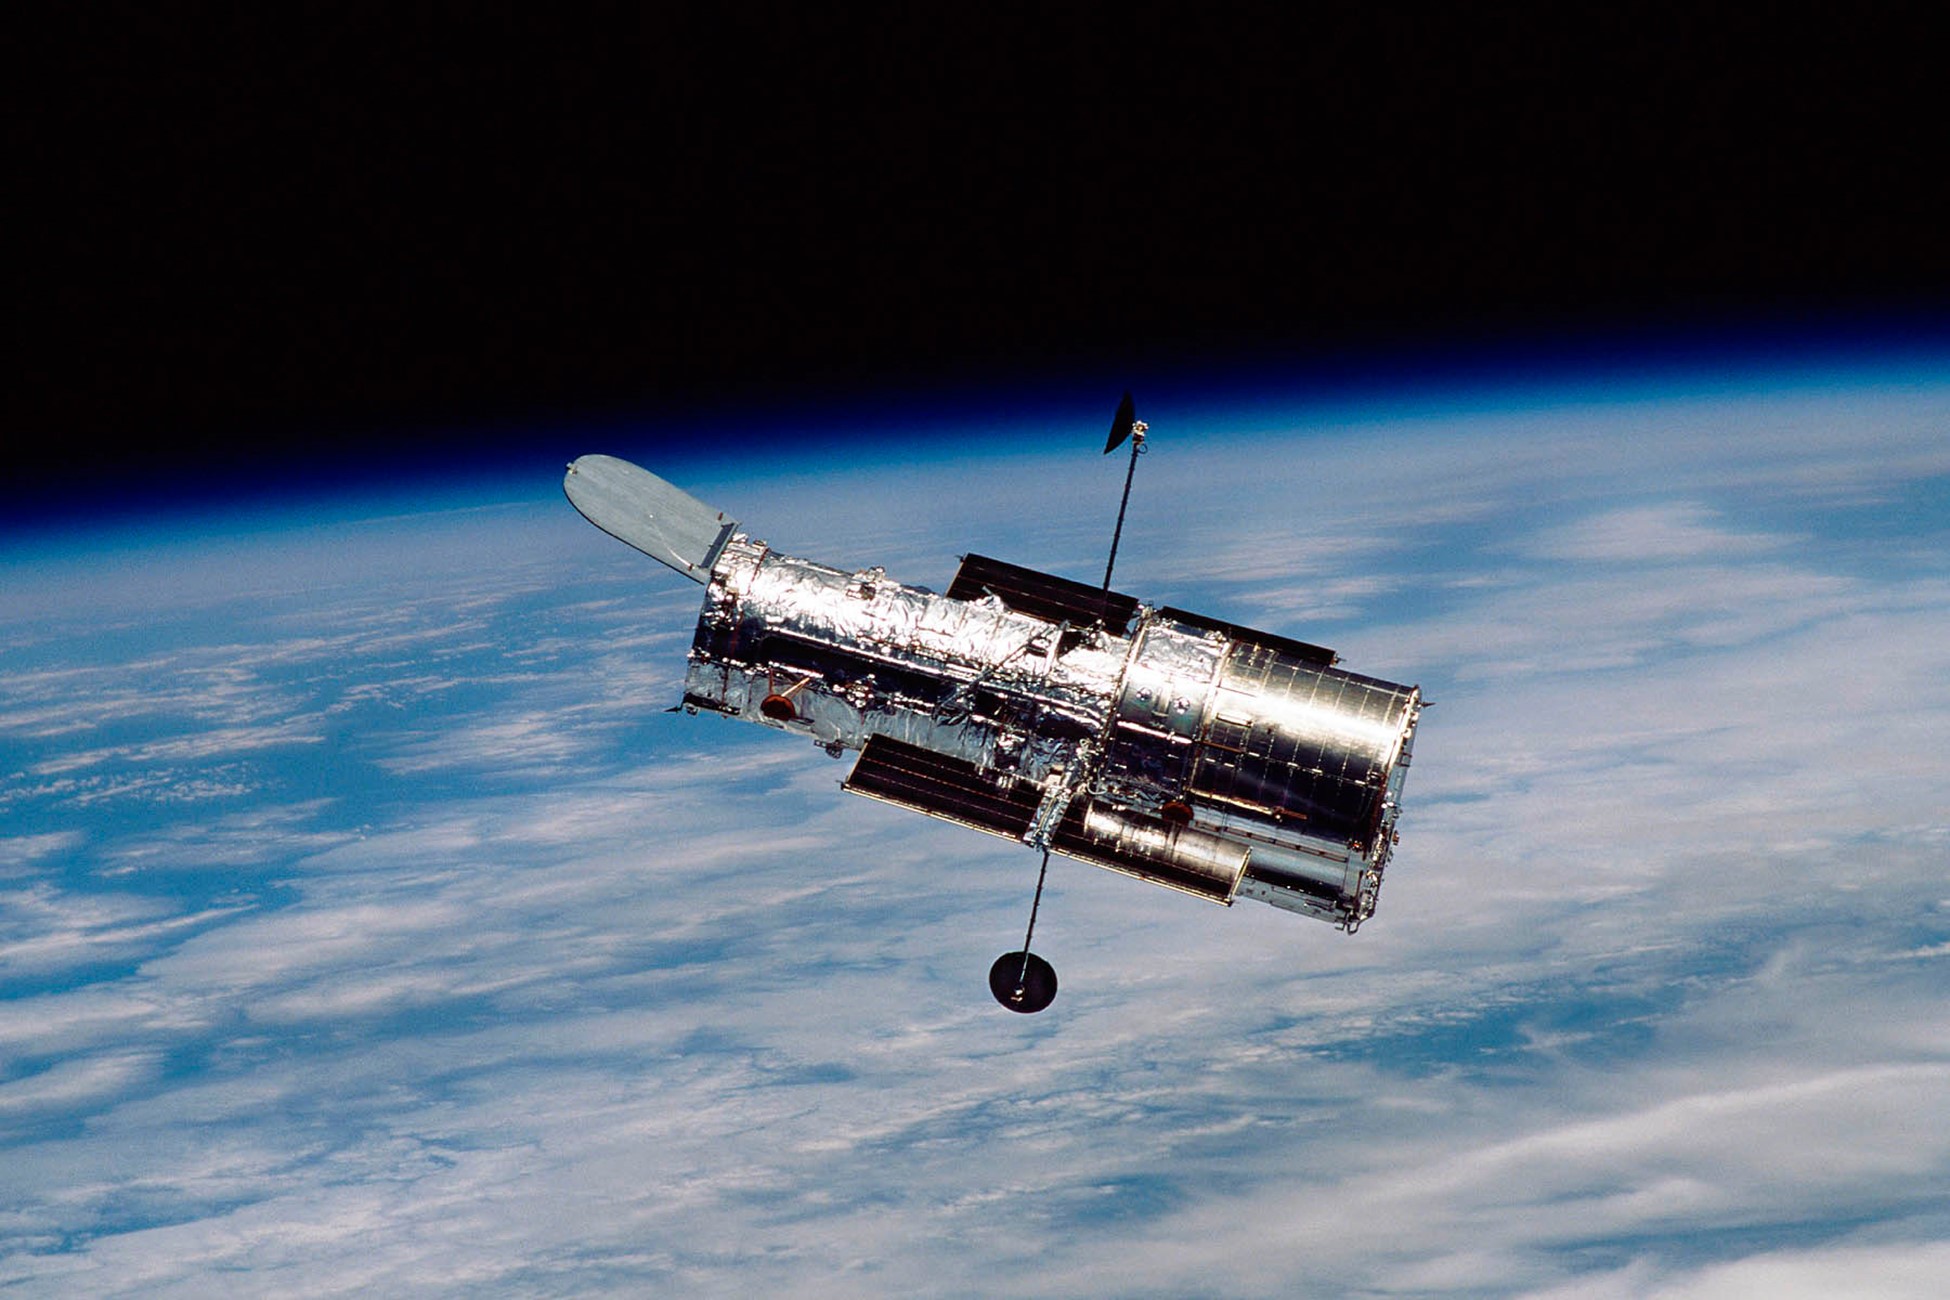 The Hubble Space Telescope is in low-Earth orbit, close enough for a Space Shuttle visit. This photo was taken after Hubble’s fourth servicing mission in 2002. The fifth and final mission took place in 2009. Credit: NASA